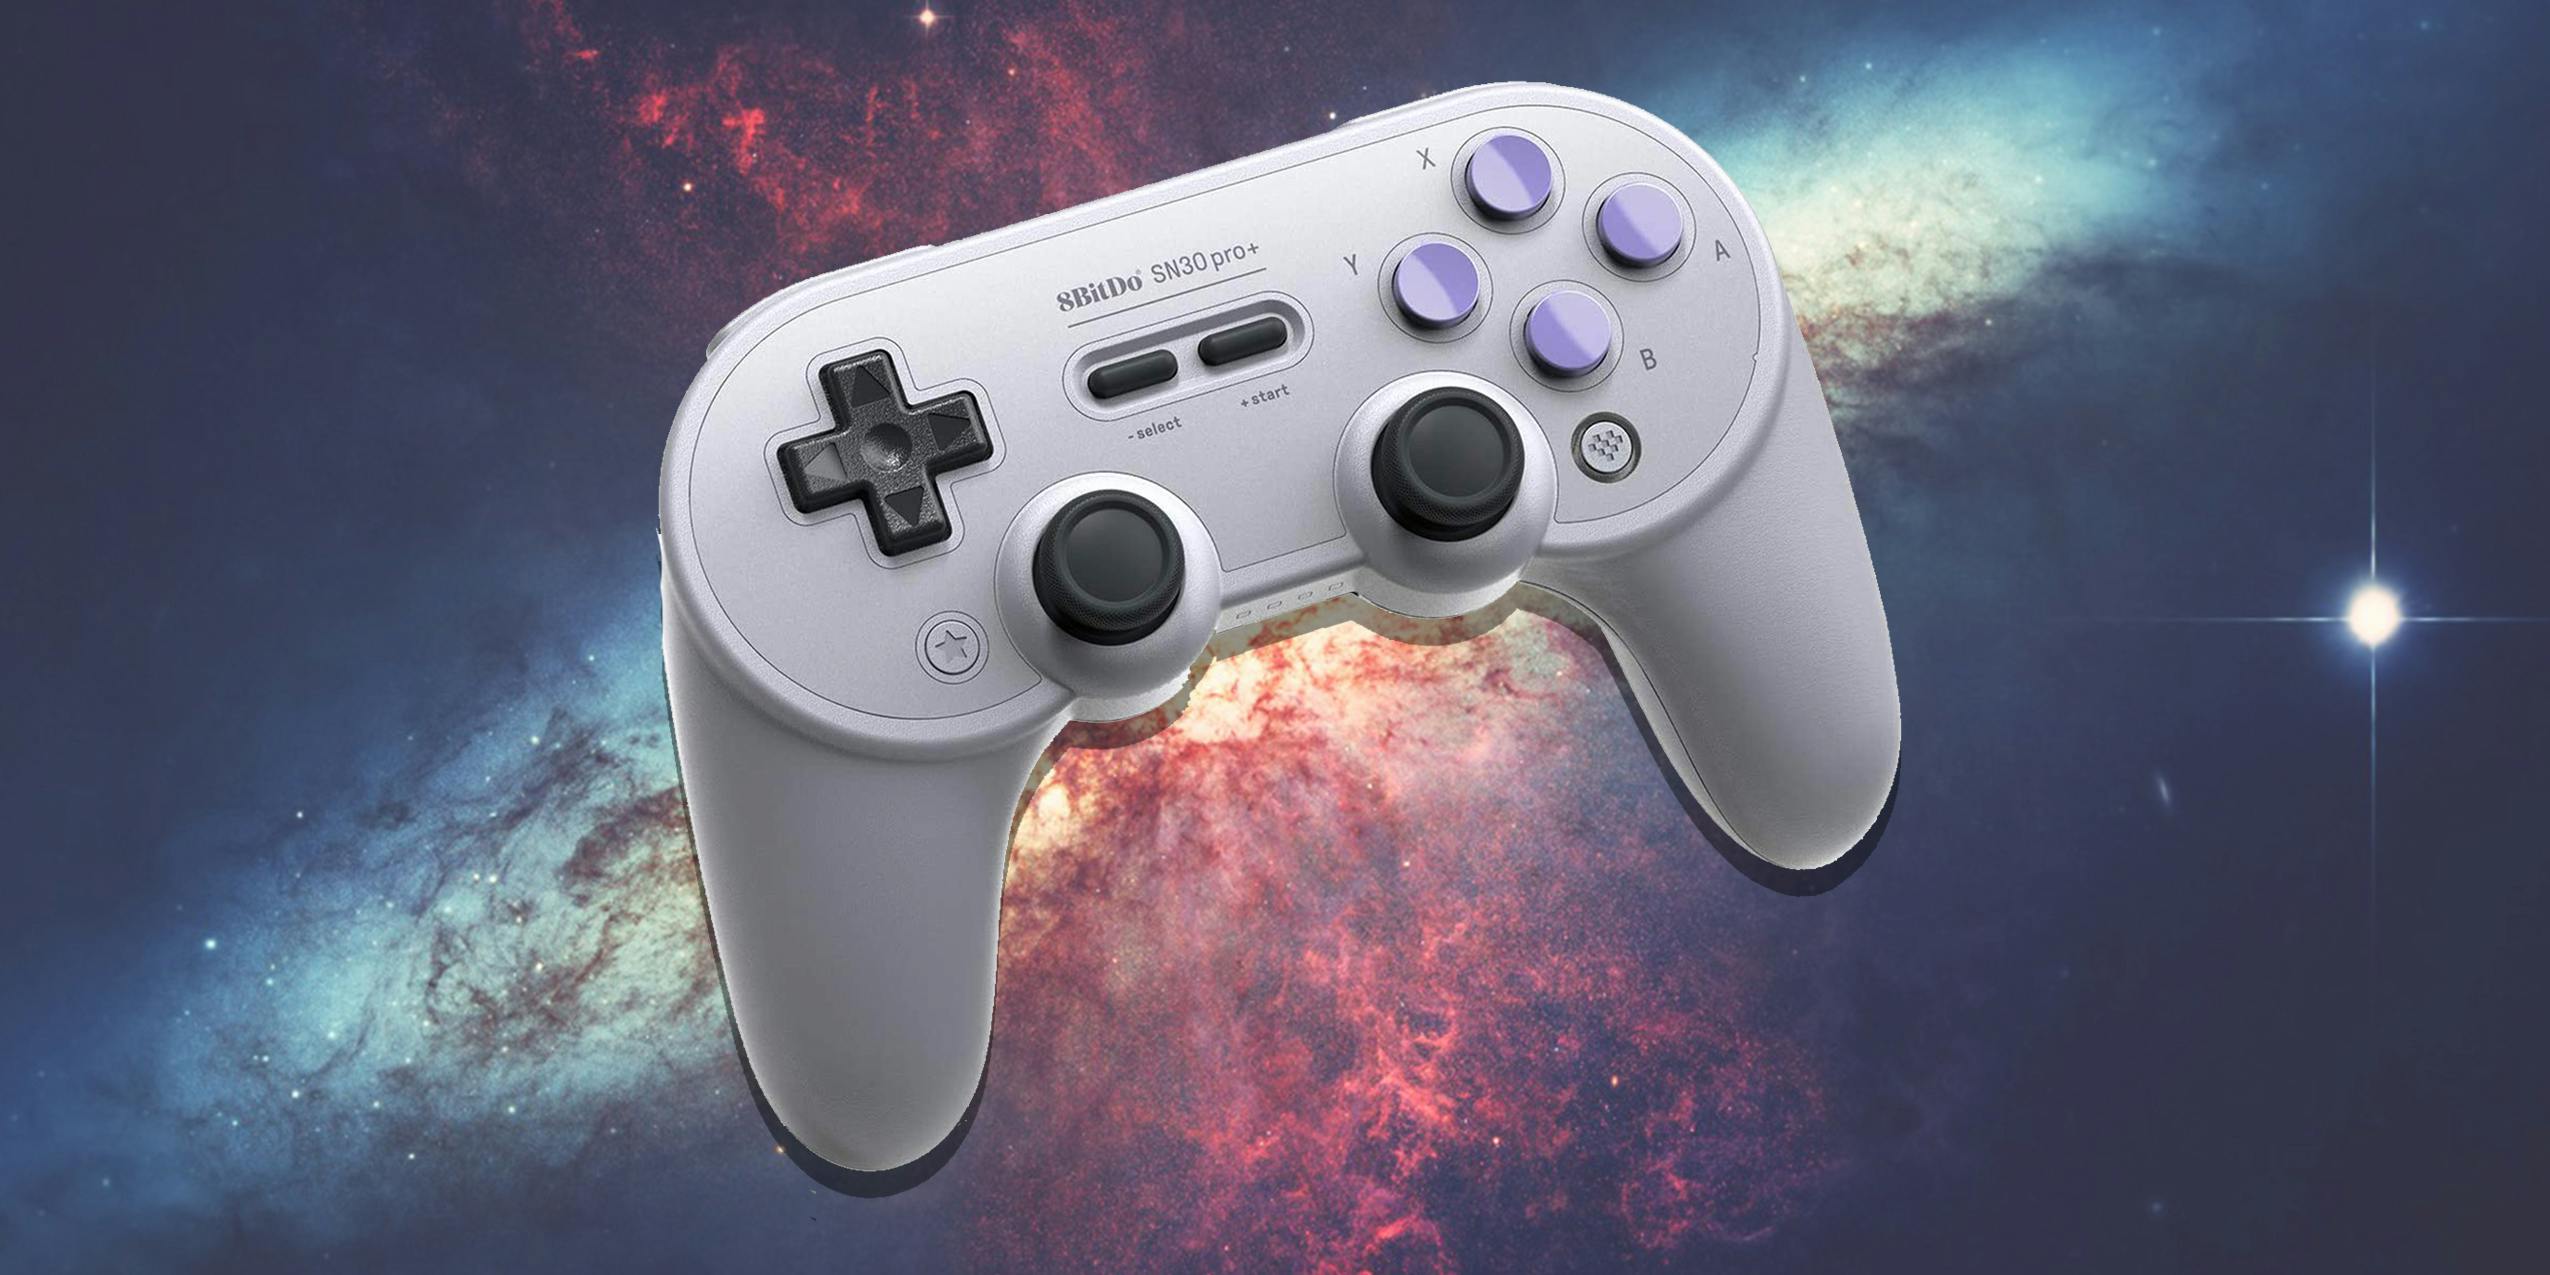 8bitdo Sn30 Pro Plus Review Is This Snes Controller Worth It